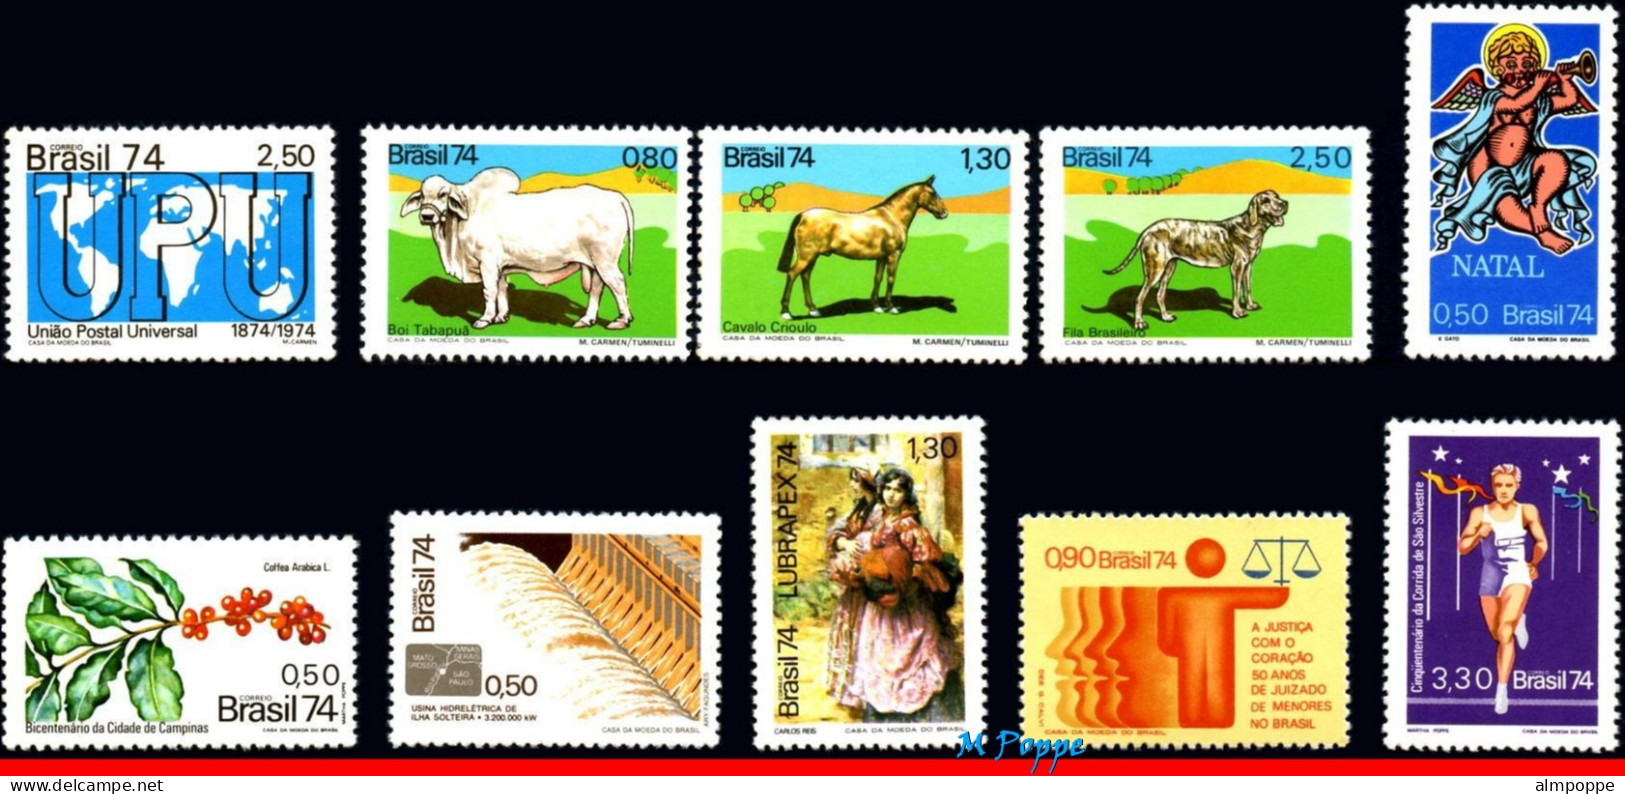 Ref. BR-Y1974 BRAZIL 1974 - ALL STAMPS ISSUED, FULLYEAR, SCOTT 1332-1374, MNH, . 43V Sc# 1332-1374 - Años Completos